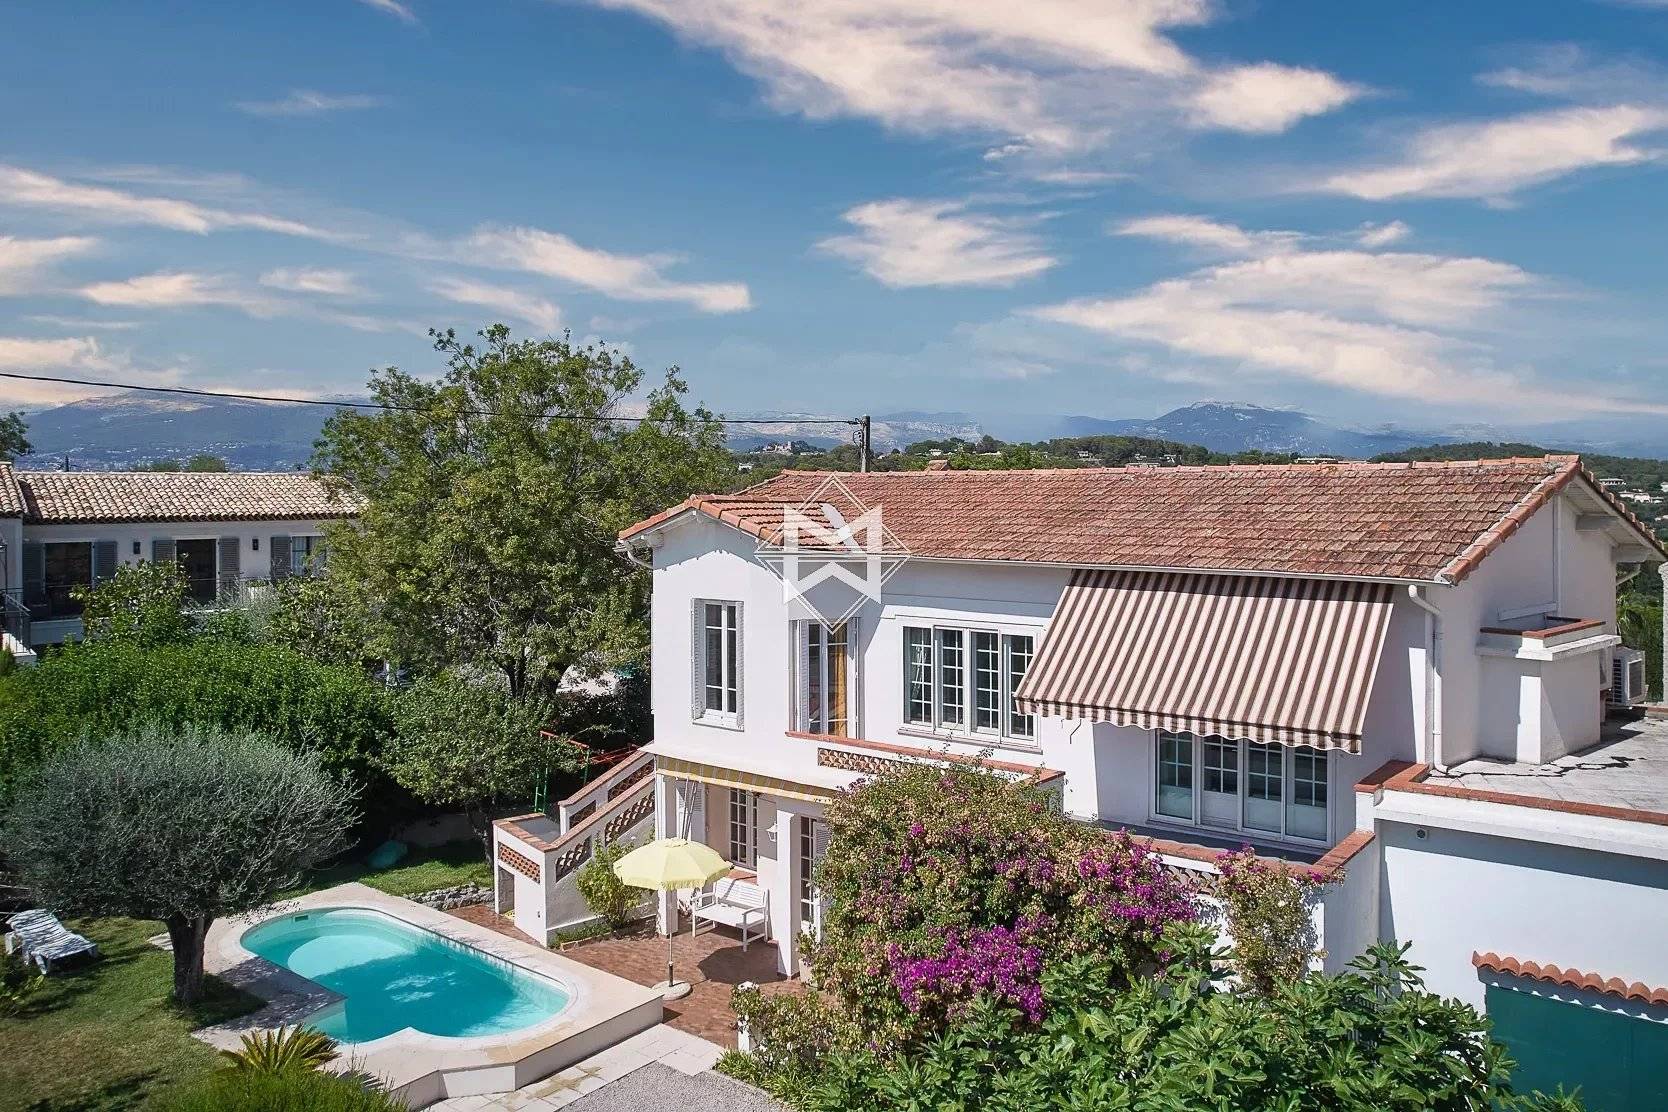 Walking distance from the village - Charming Provençale